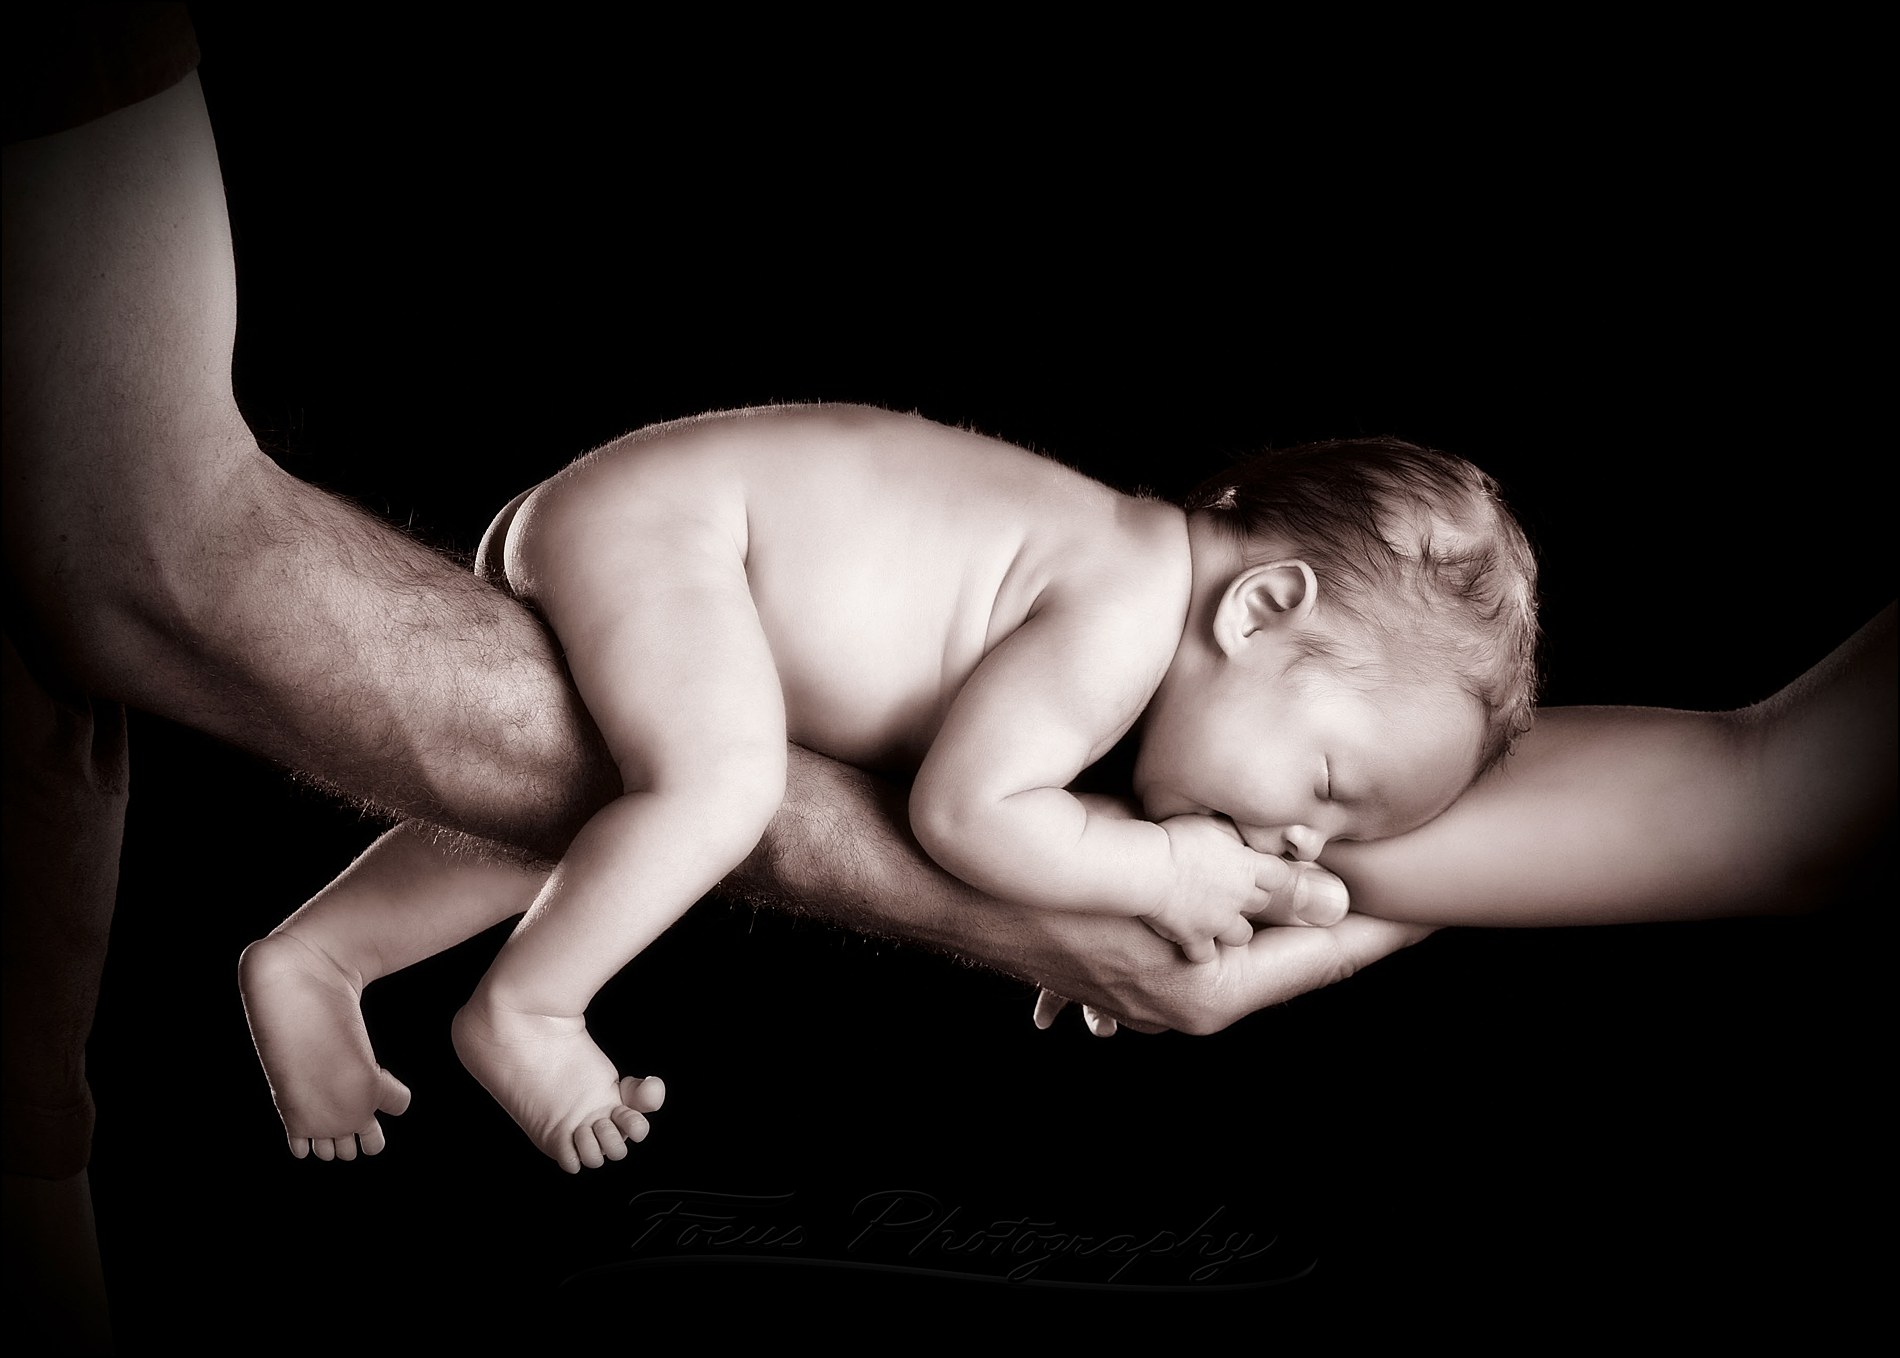 newborn balances on parents' arms in black and white photo